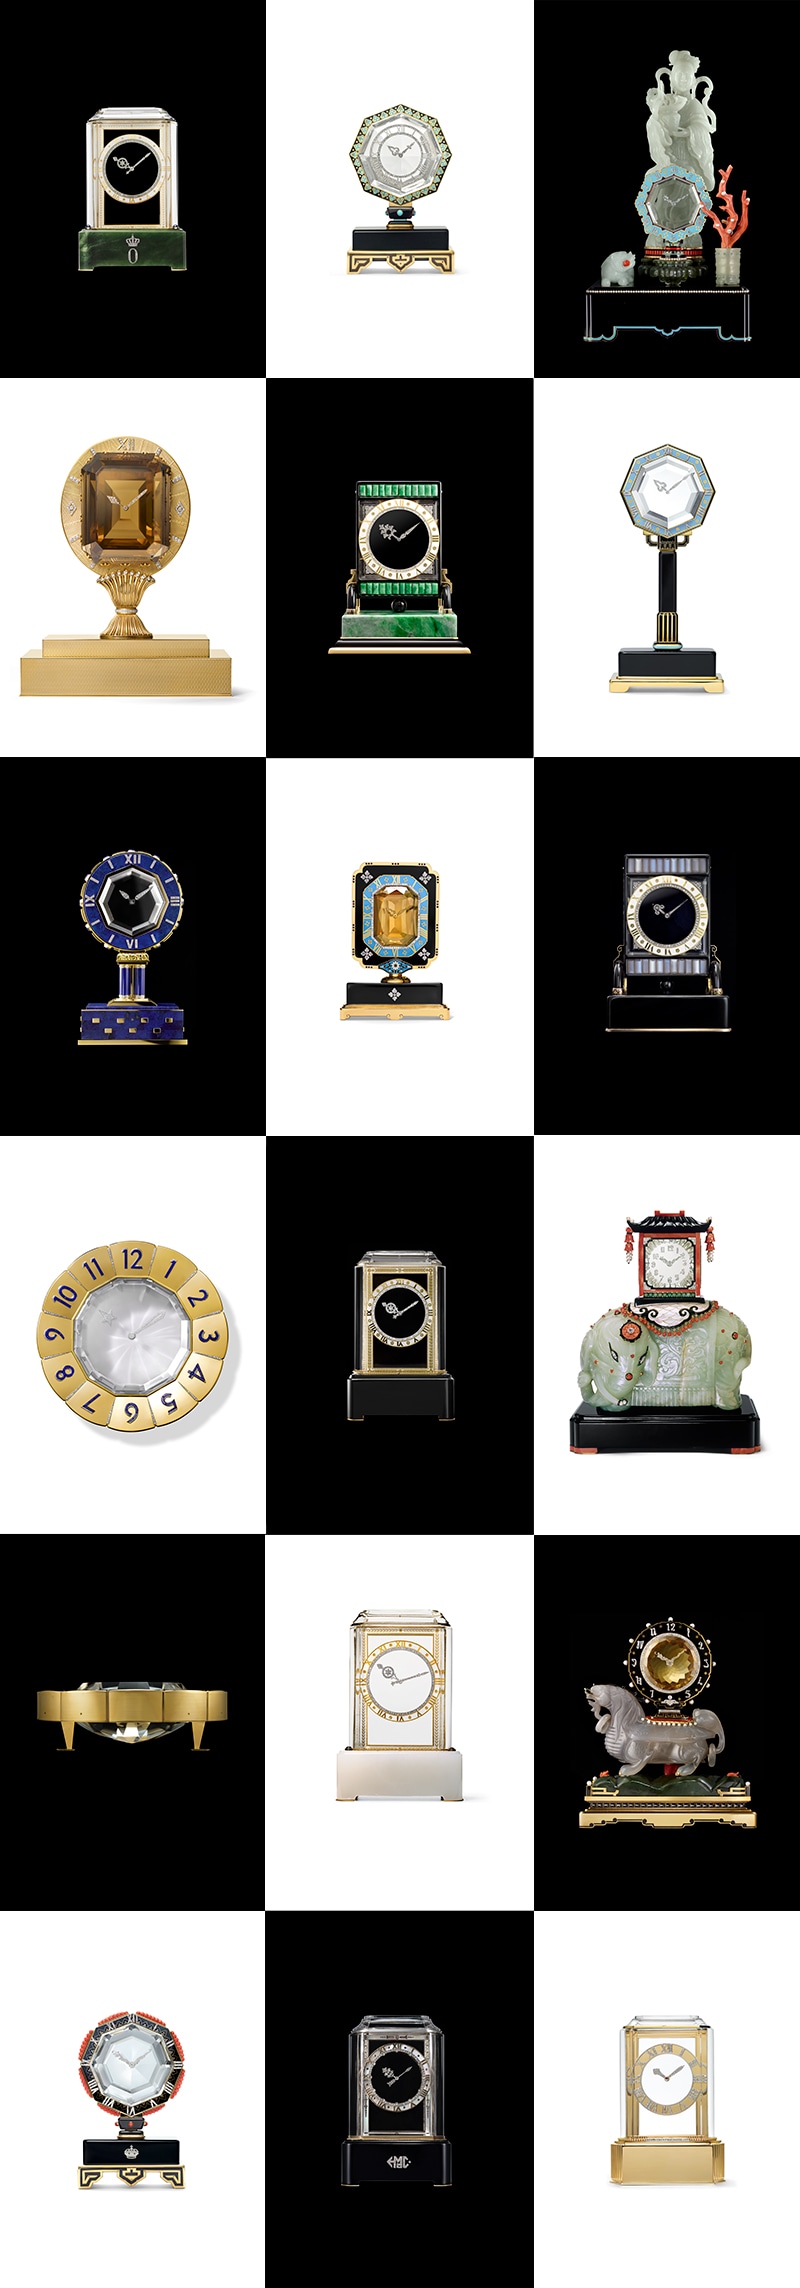 Mystery clocks in the Cartier collection